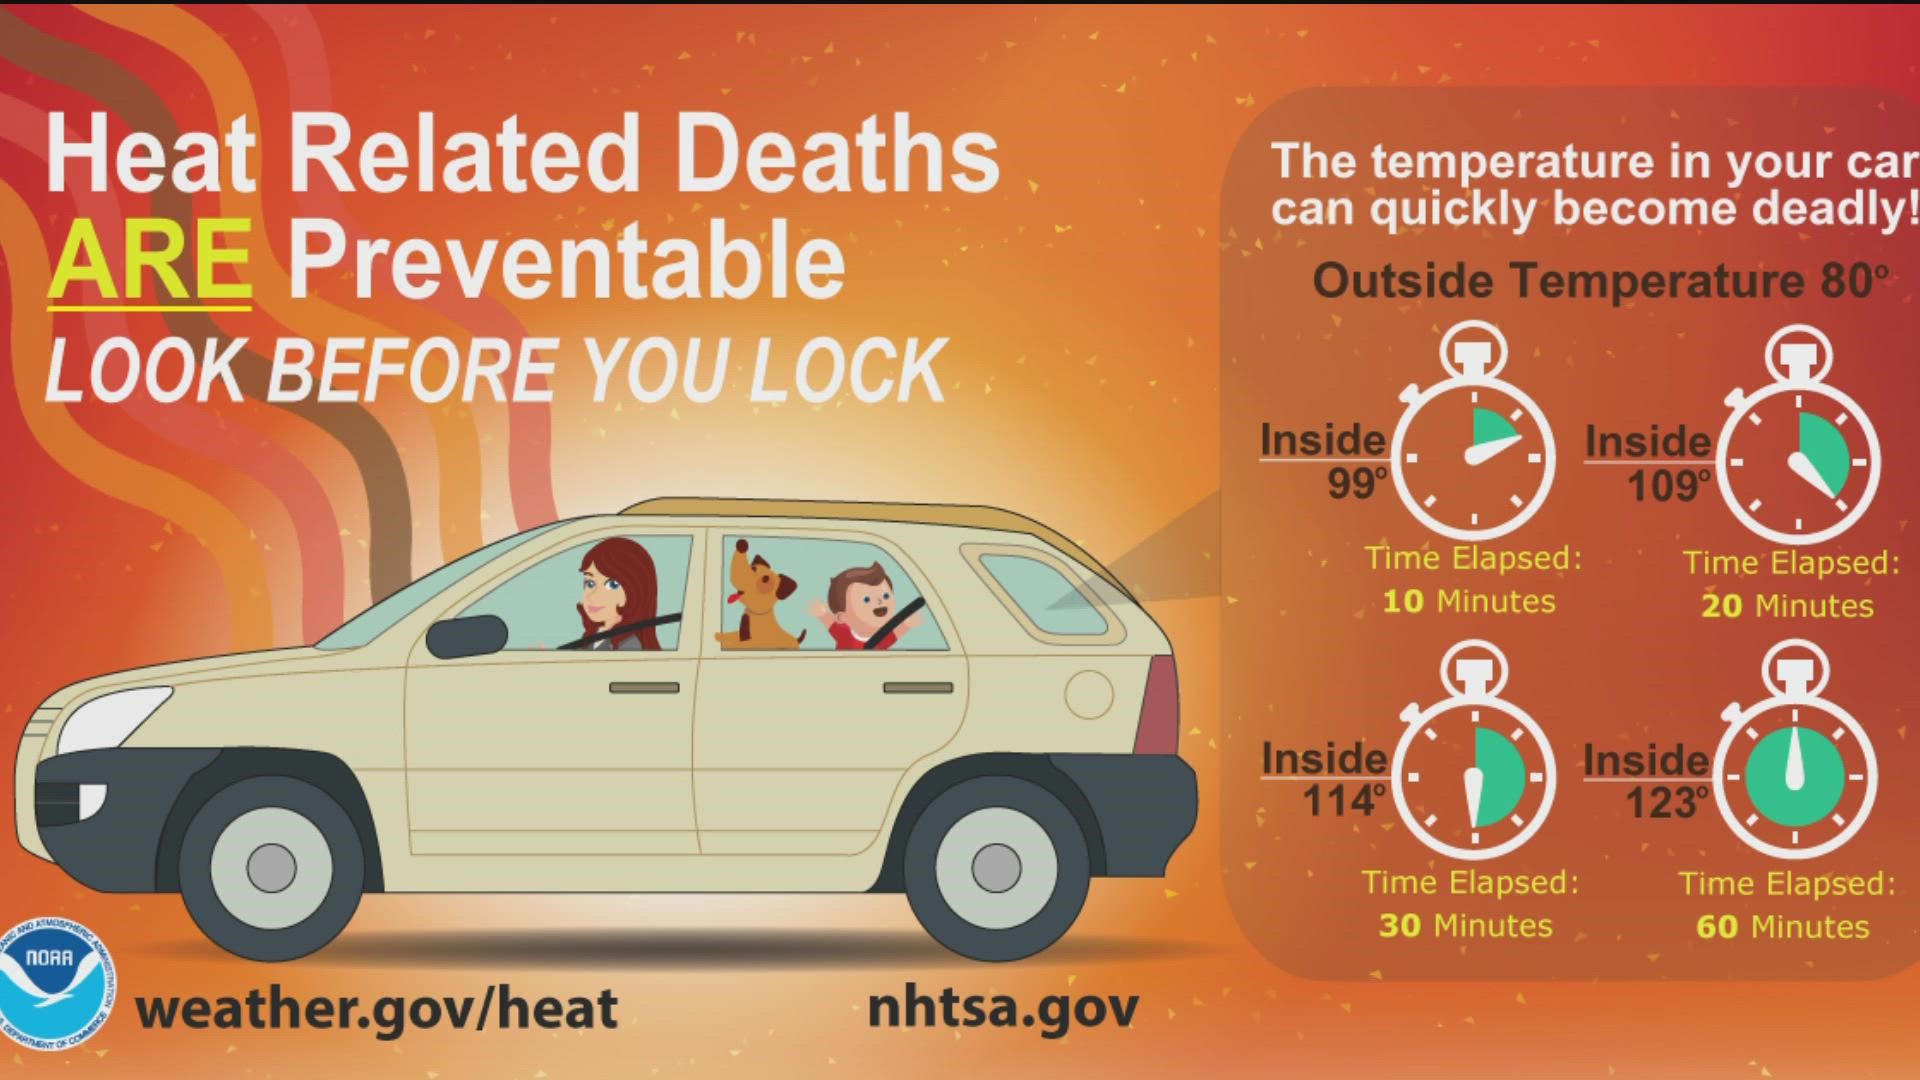 Heat-related deaths are preventable.